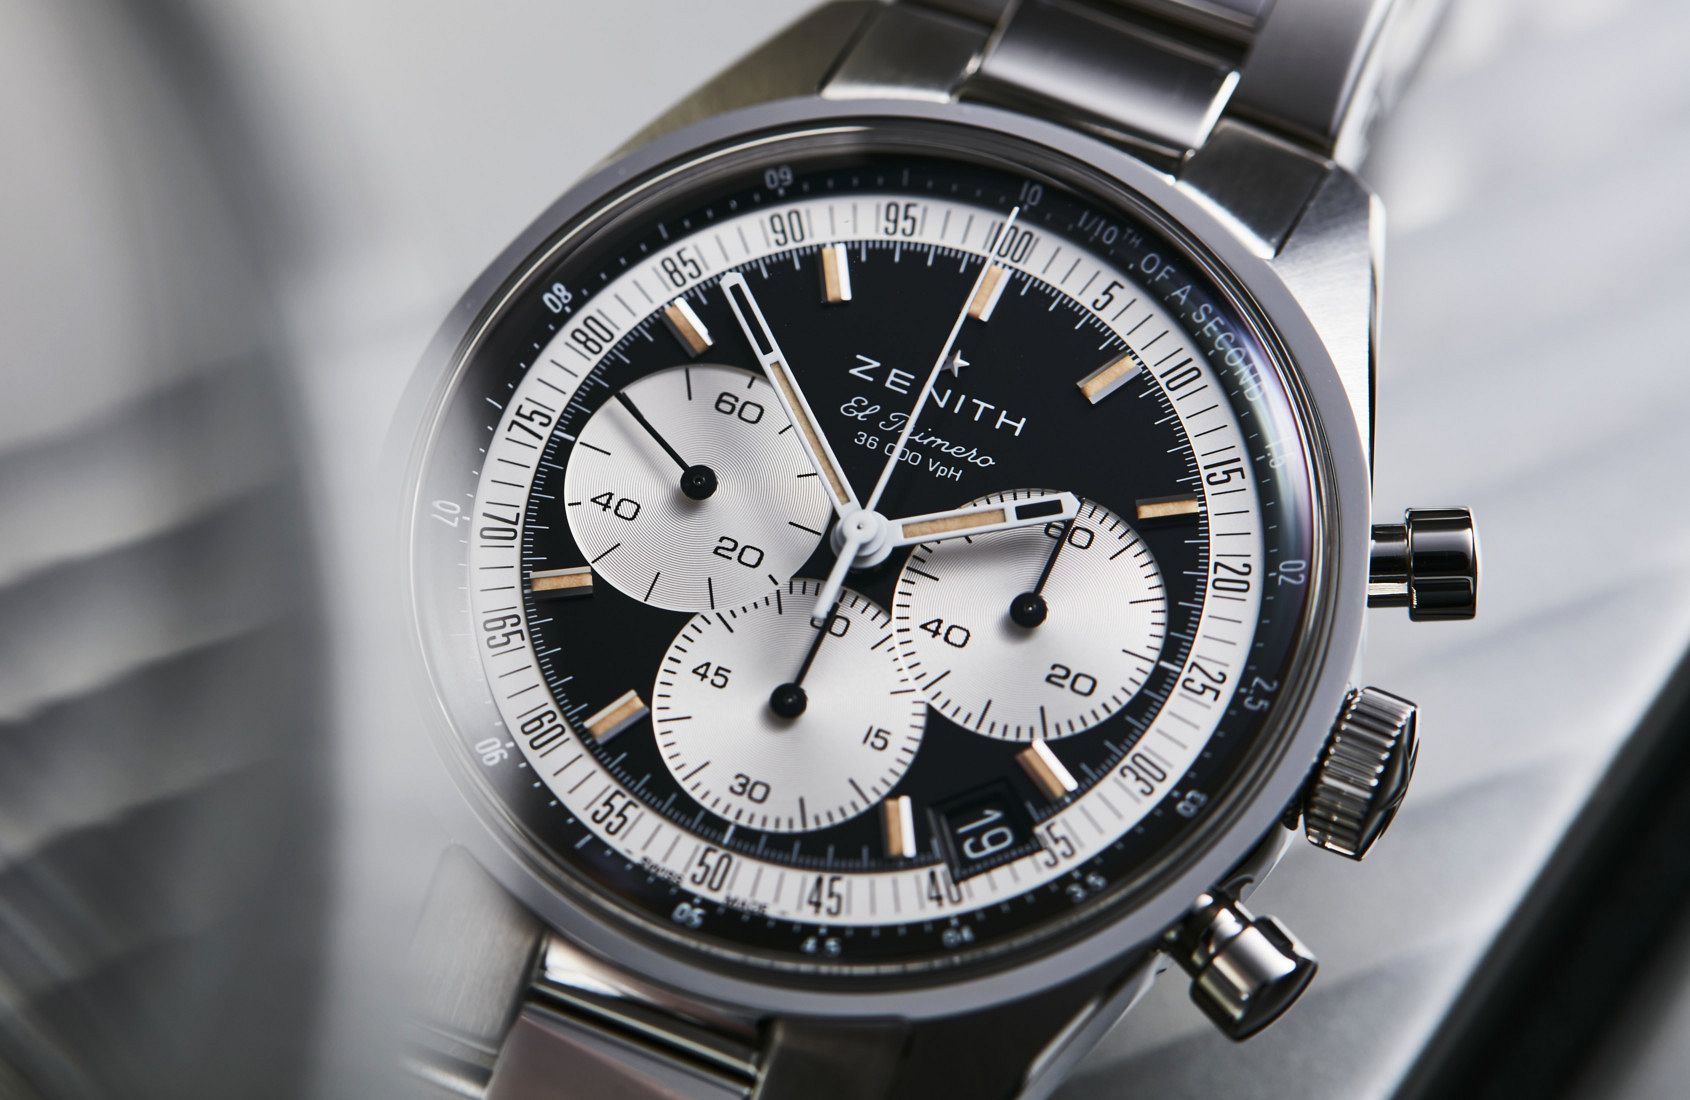 INTRODUCING The new Zenith Chronomaster Original watches